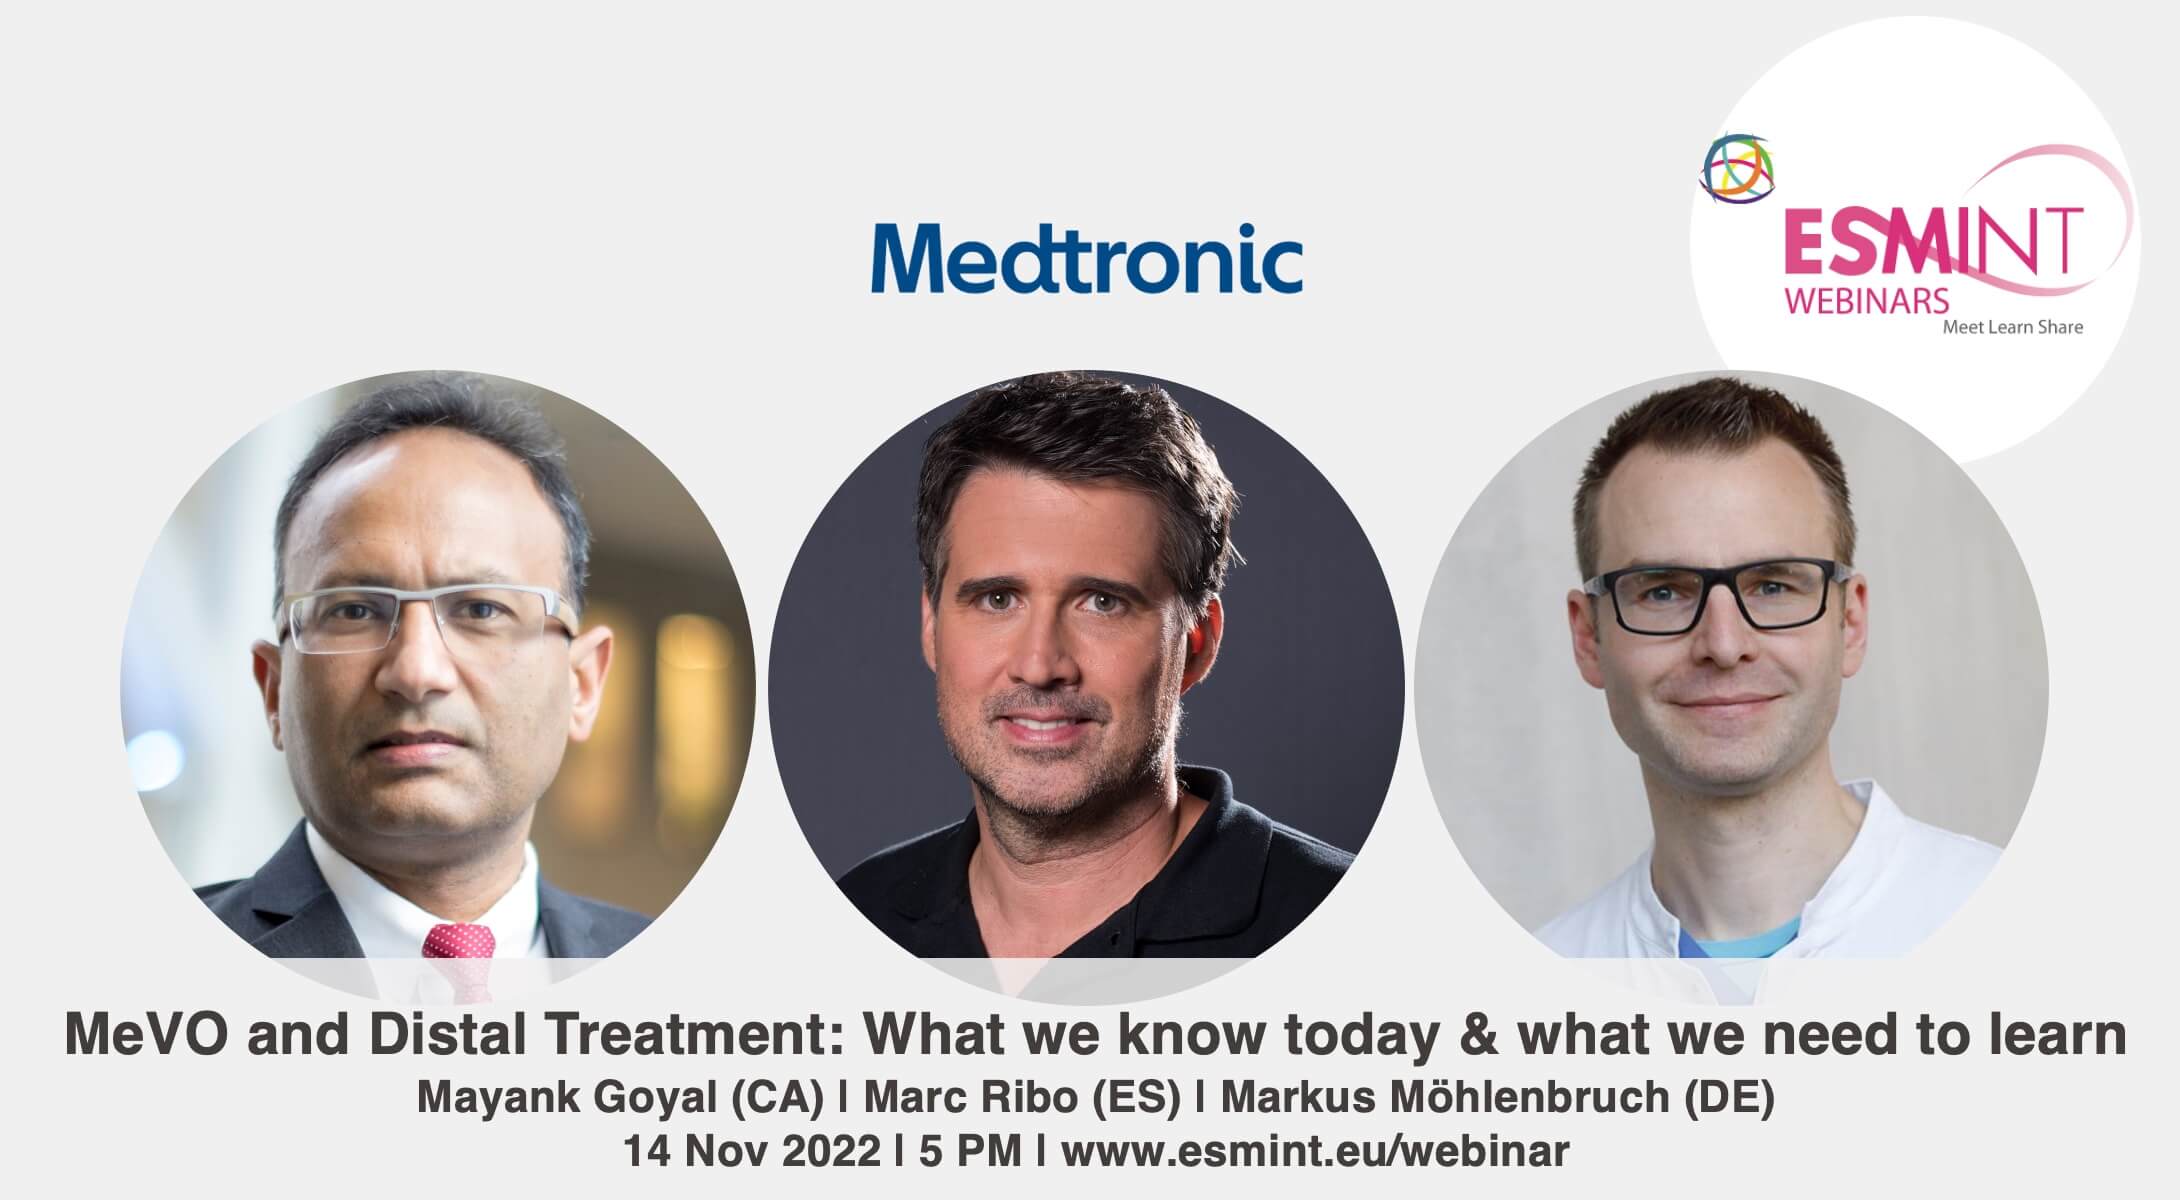 Weinbar on MeVO and Distal Treatment with Prof. Goyal, Dr. Ribo and Prof. Möhlenbruch.